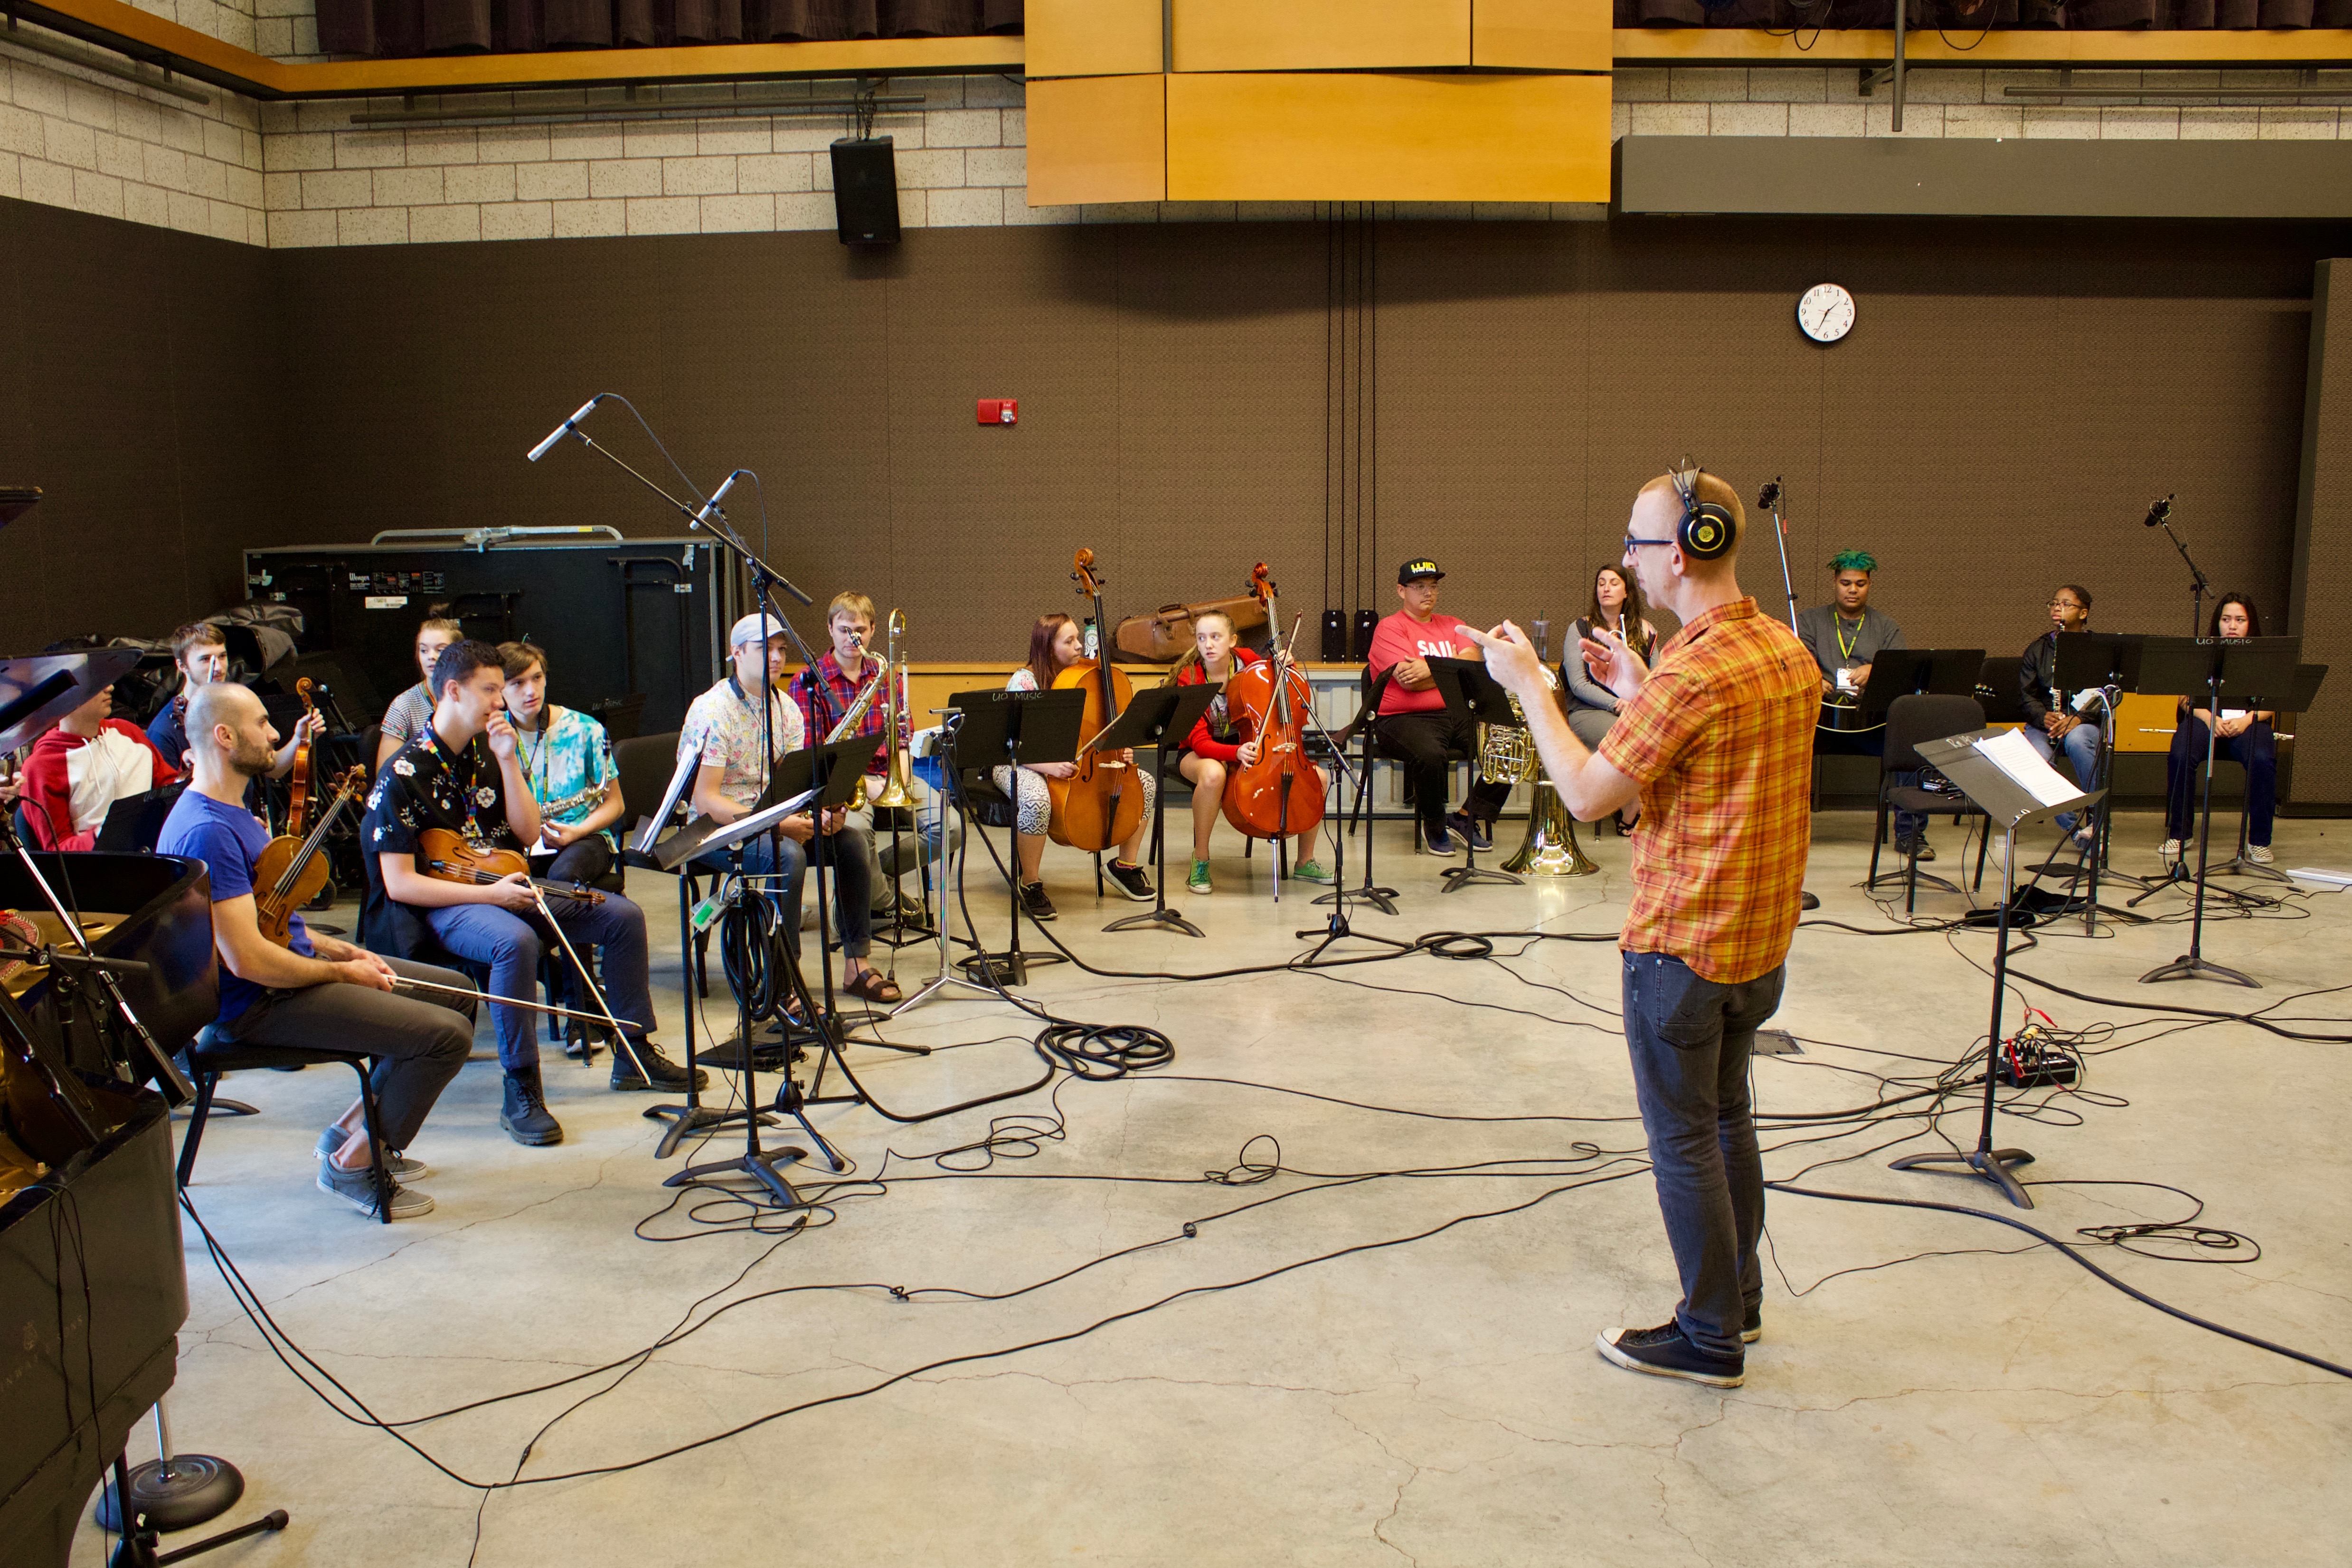 SAIL ON – Orchestra Next’s Recording Camp 2018